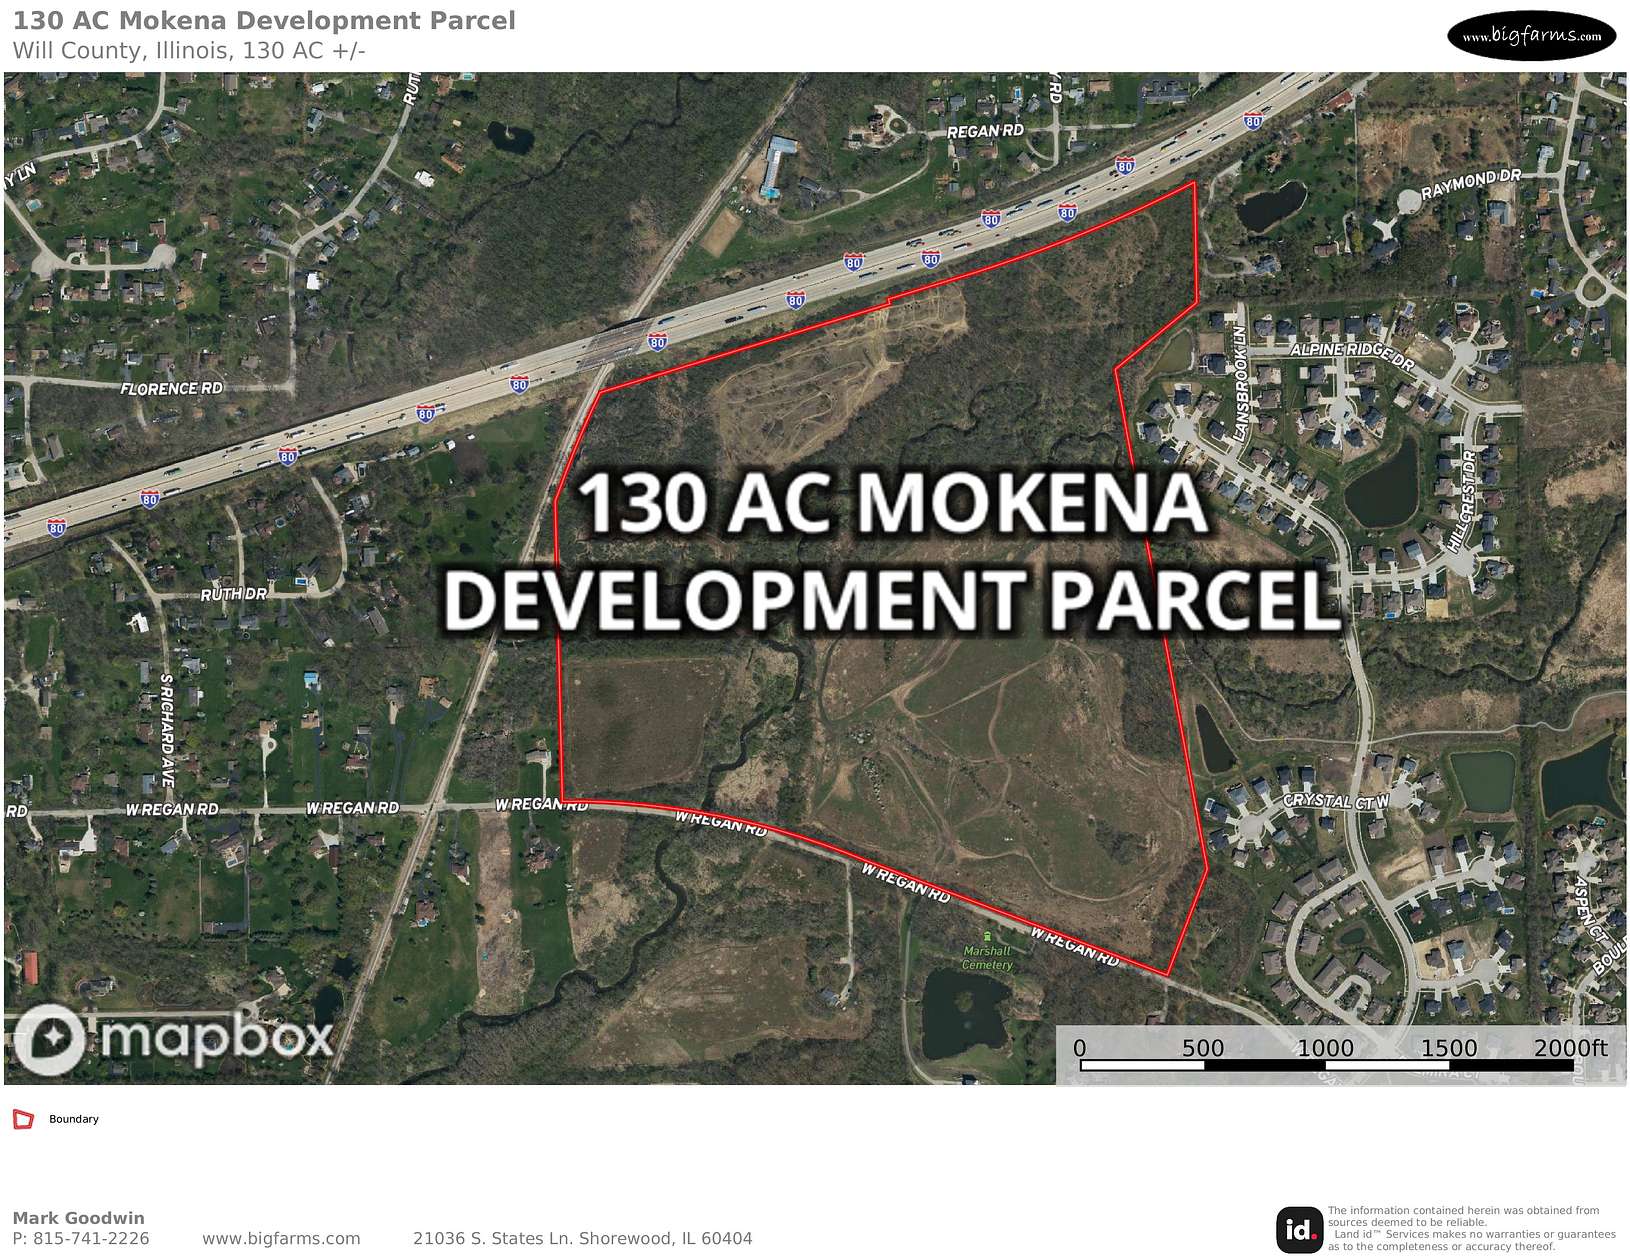 130 Acres of Recreational Land for Sale in Mokena, Illinois